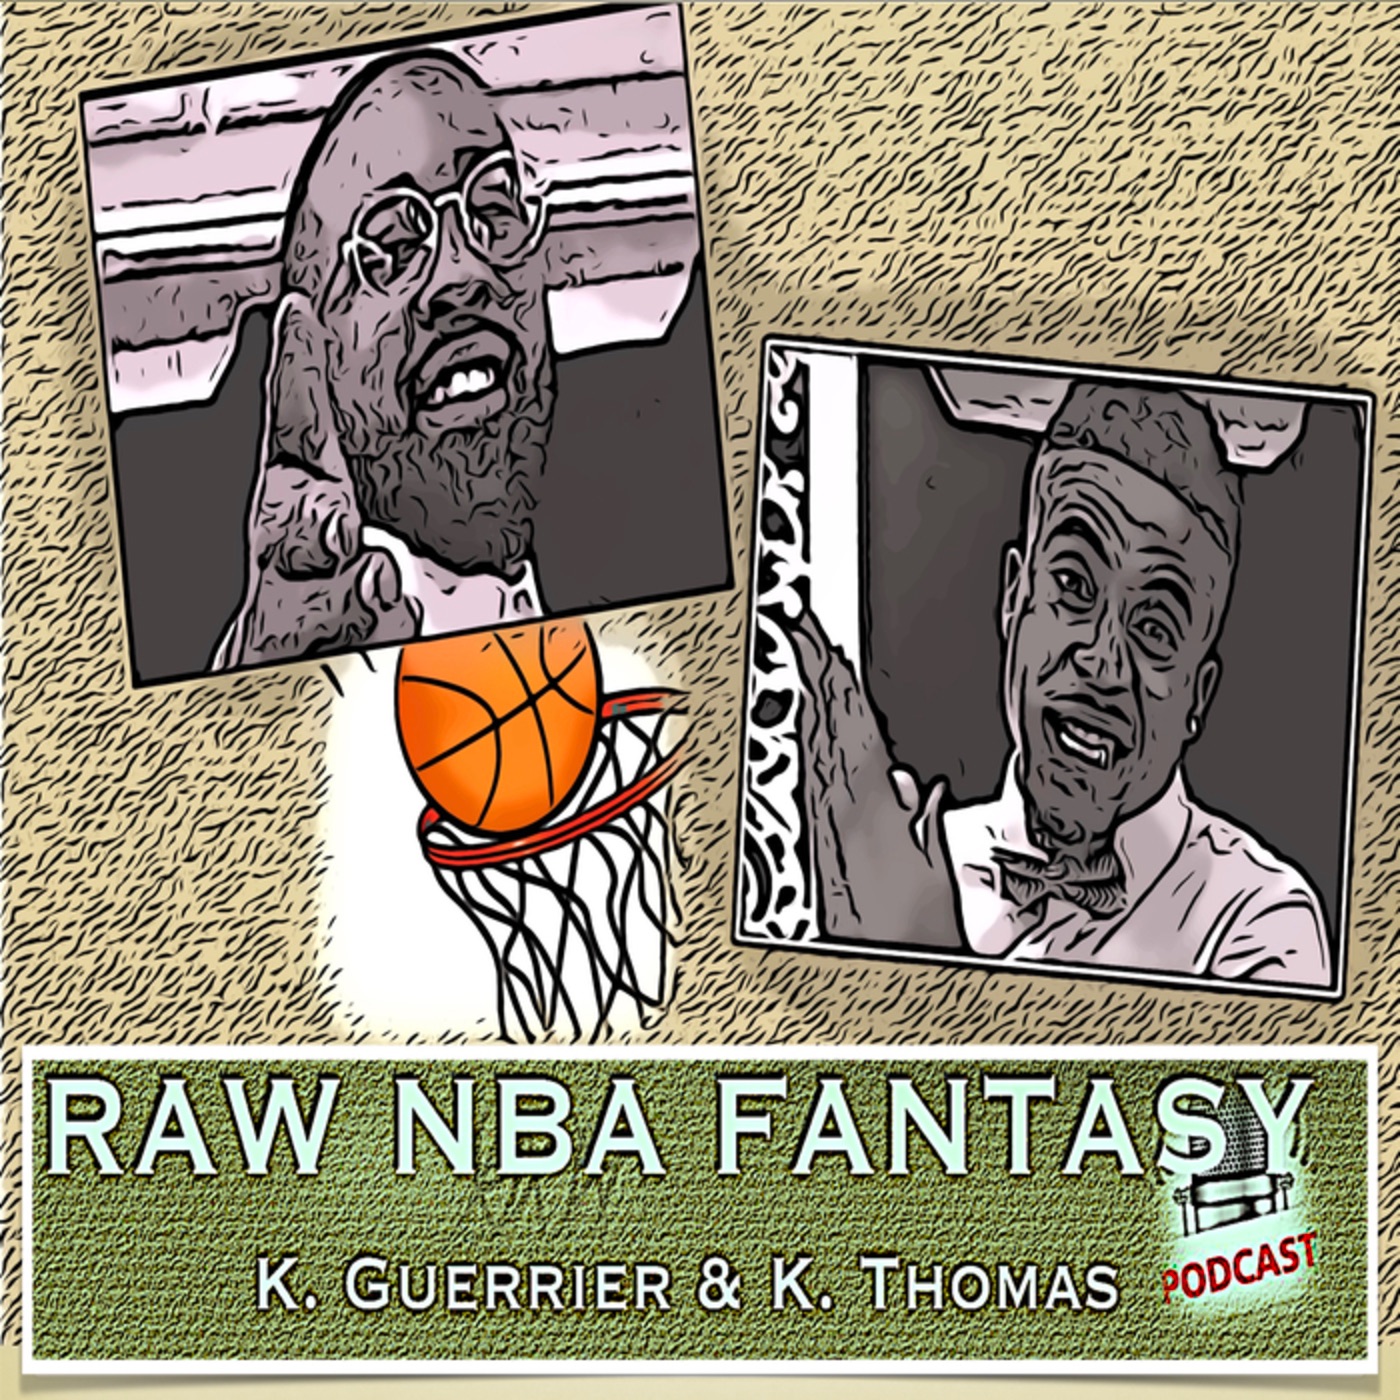 Stream RAW NBA FANTASY Listen to podcast episodes online for free on SoundCloud